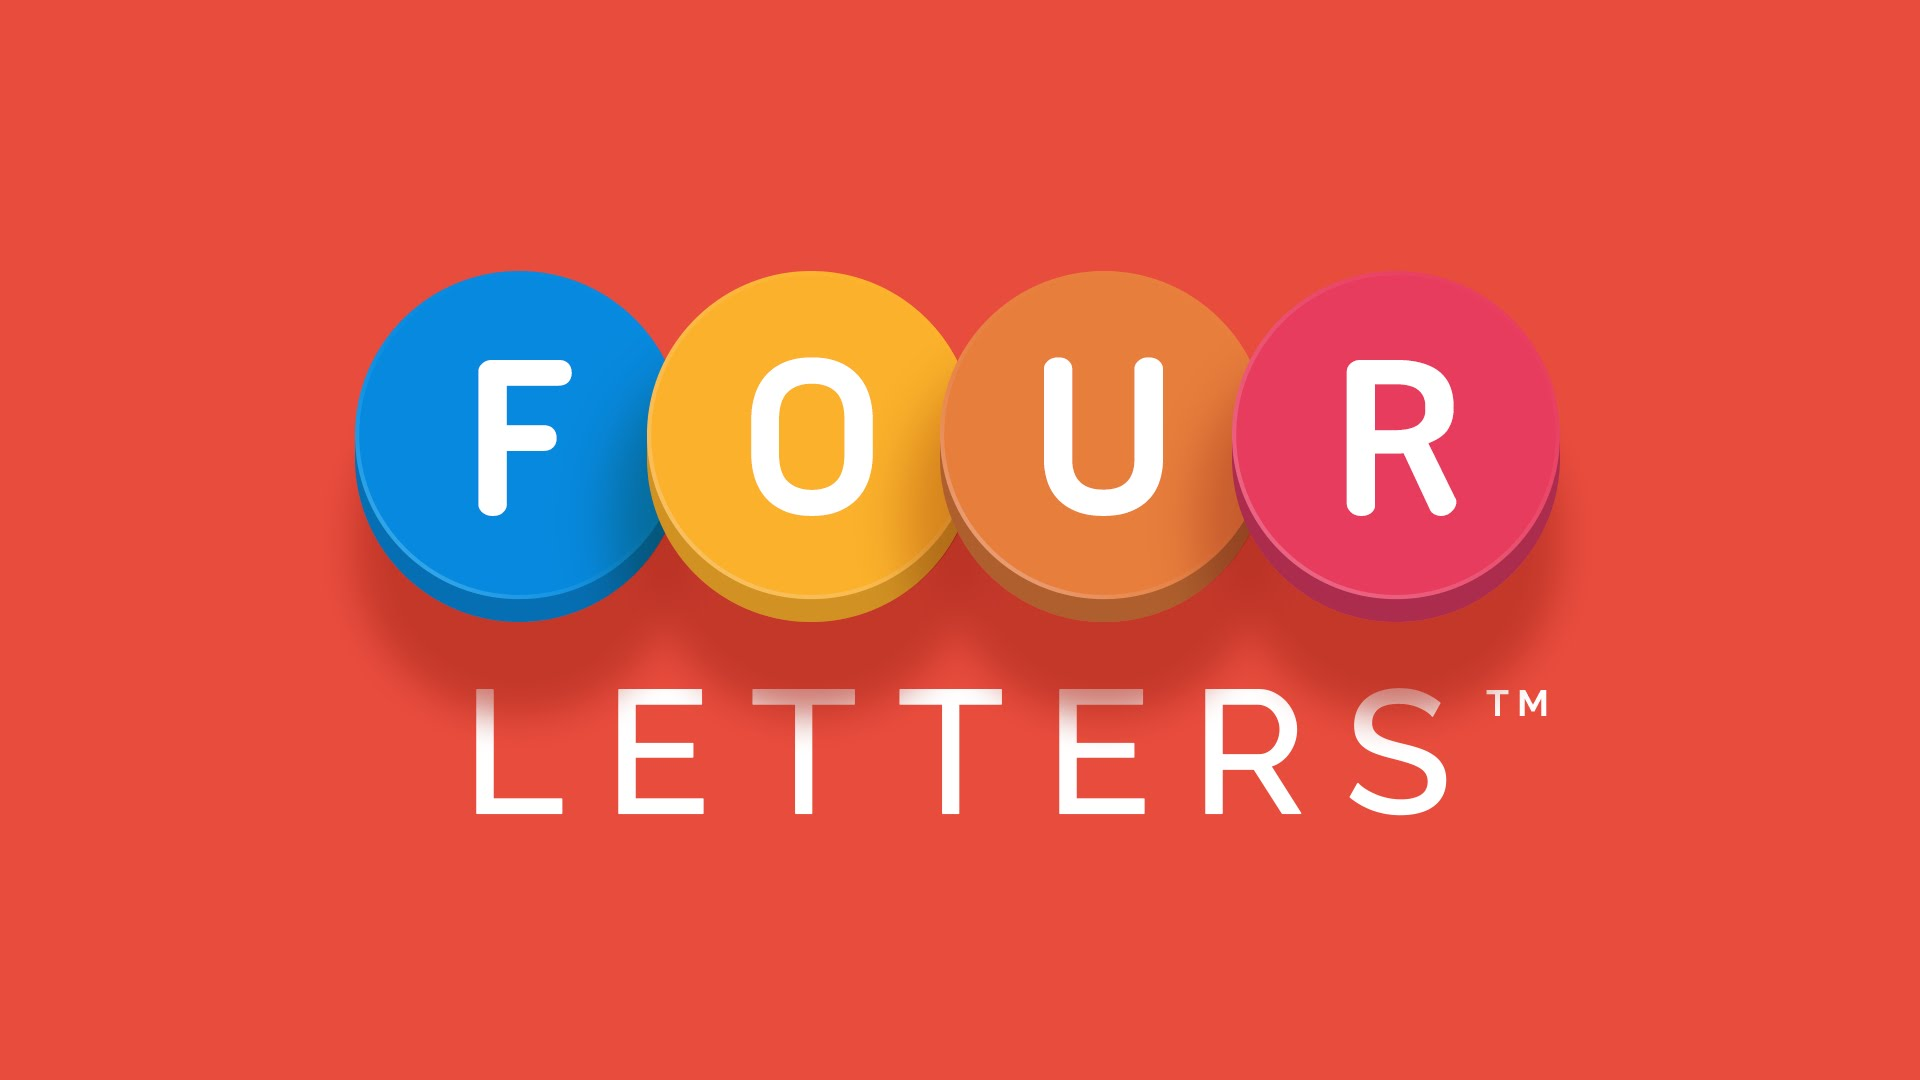 Letters game. Four Letter Words. 4 You. Four Letters logo.